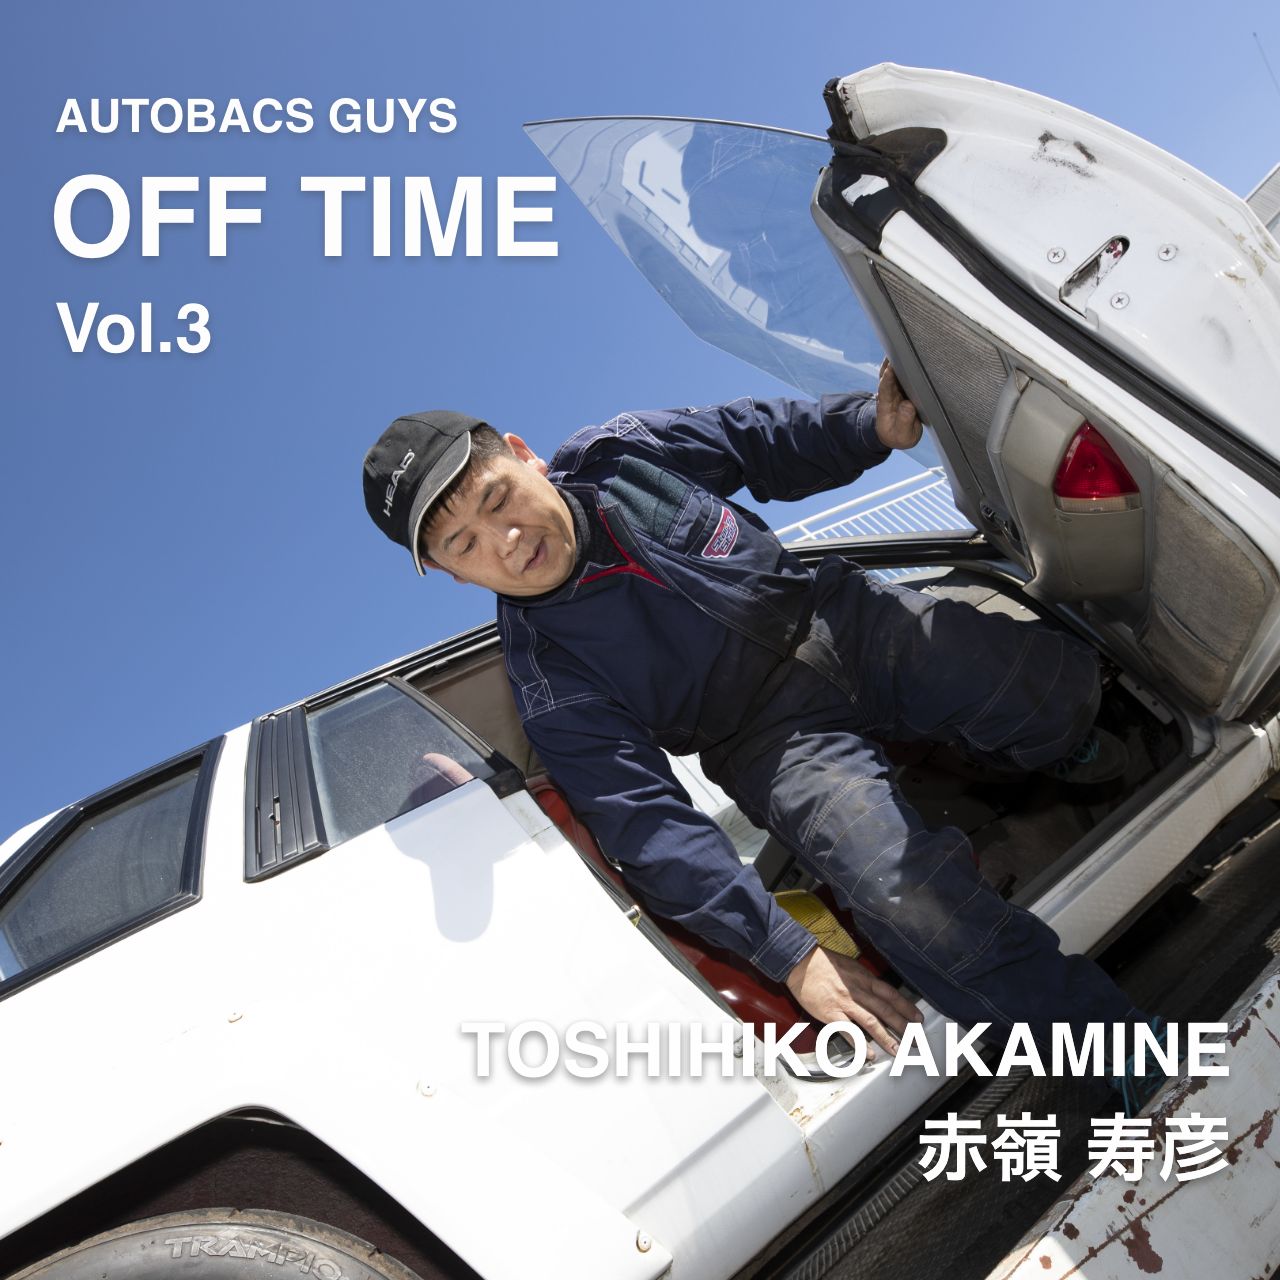 AUTOBACS GUYS OFF TIME / ON TIME オートバックスガイズの裏側　Vol.3 : 赤嶺寿彦 TOSHIHIKO AKAMINE